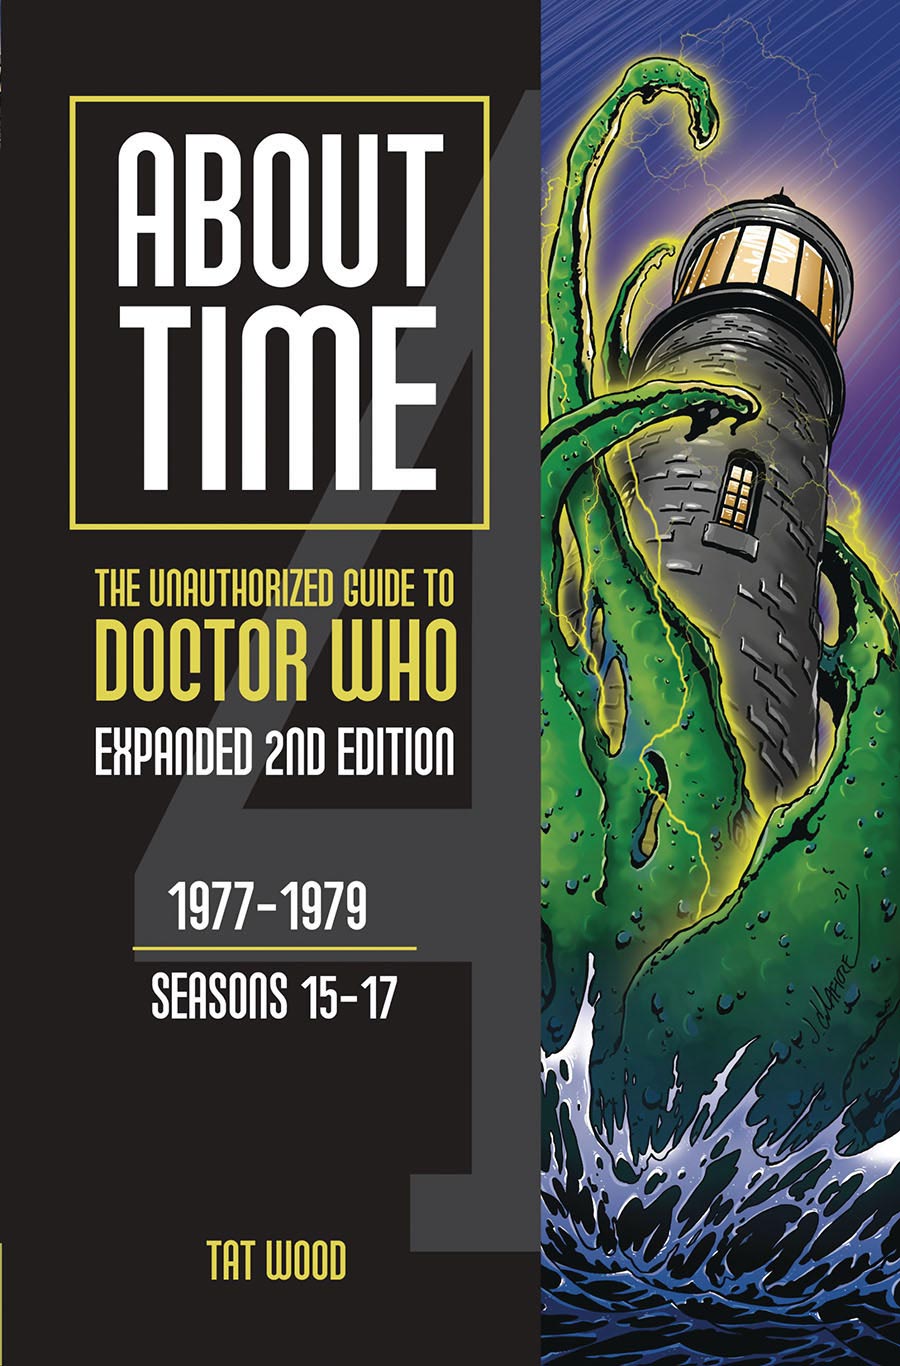 About Time Unauthorized Guide To Doctor Who 1977-1979 Seasons 15-17 TP Expanded 2nd Edition